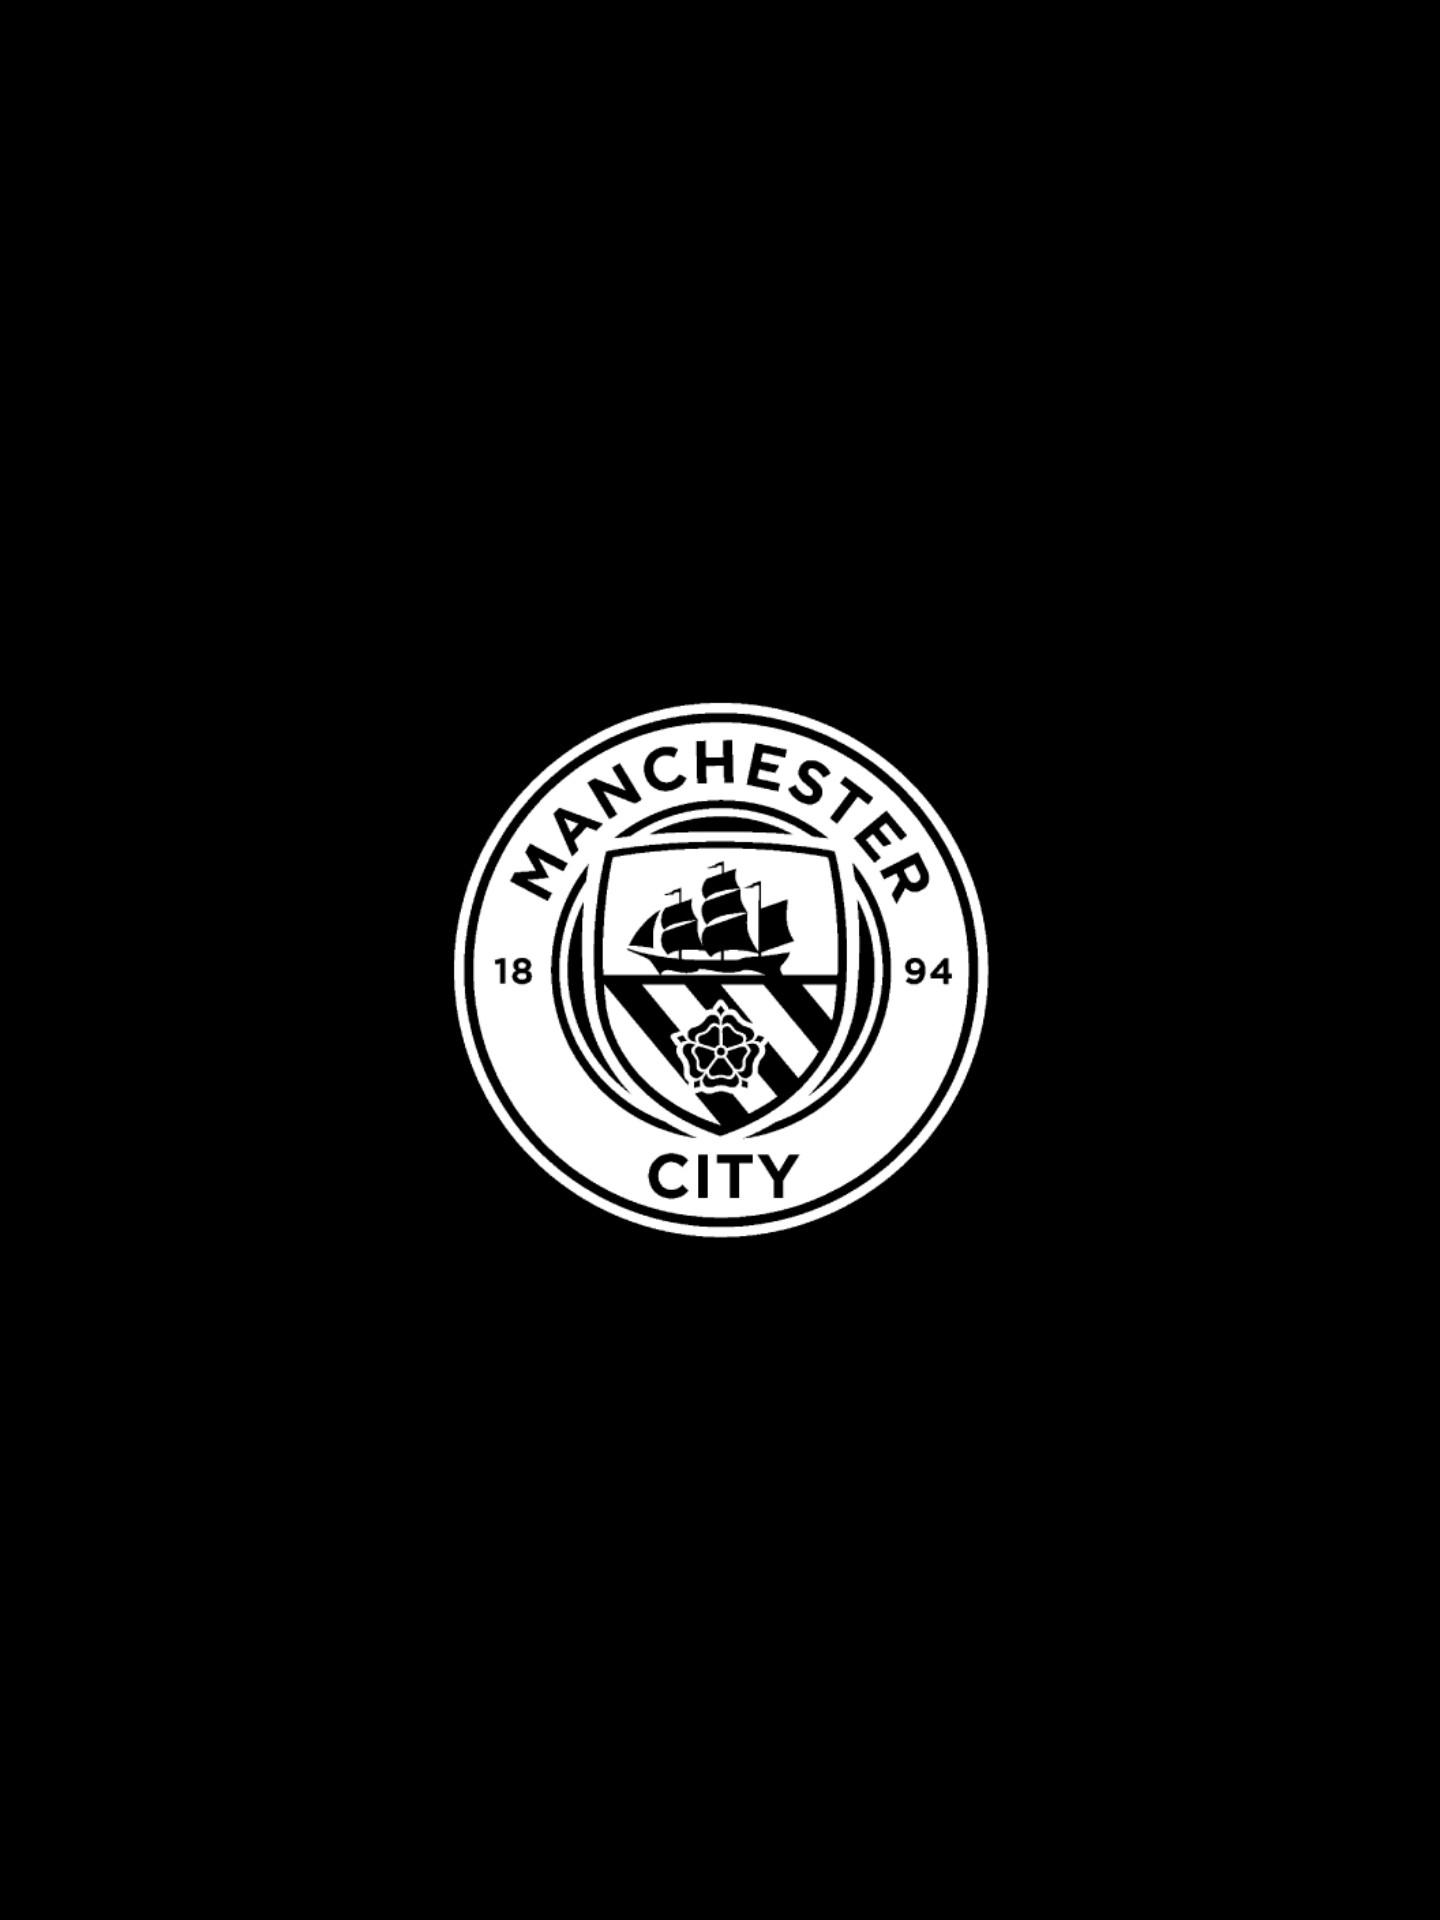 Beautiful Manchester City Wallpaper for android. Great